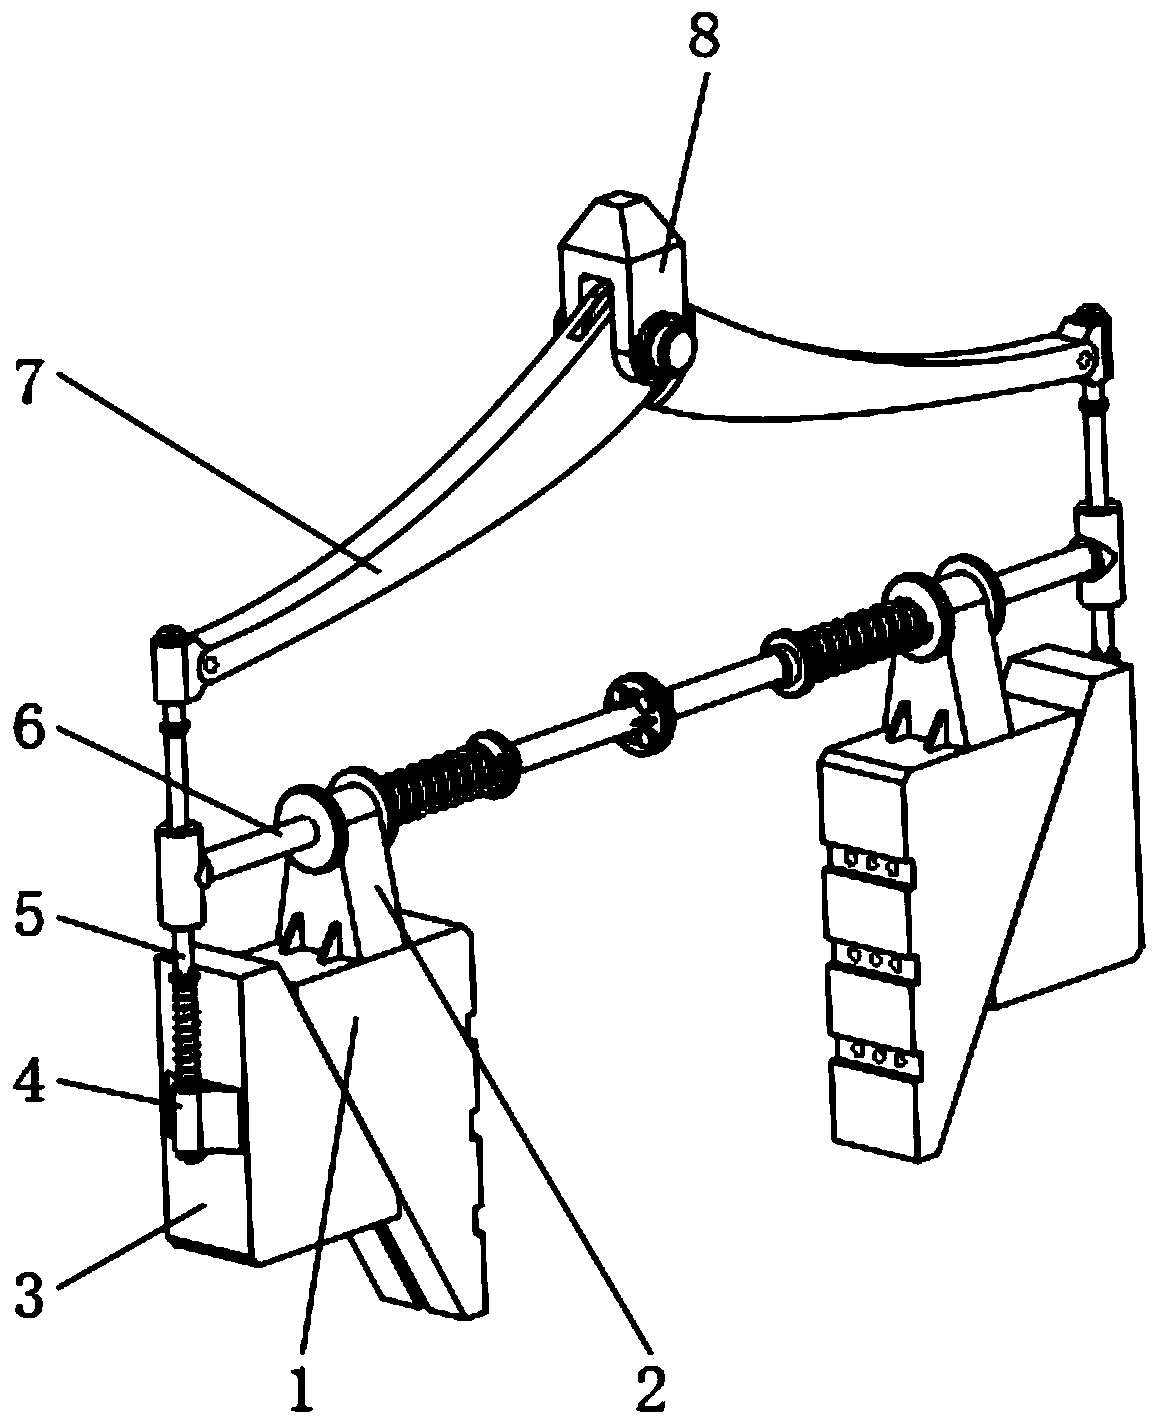 Clamping gripper mechanism based on logistics transportation loading and unloading